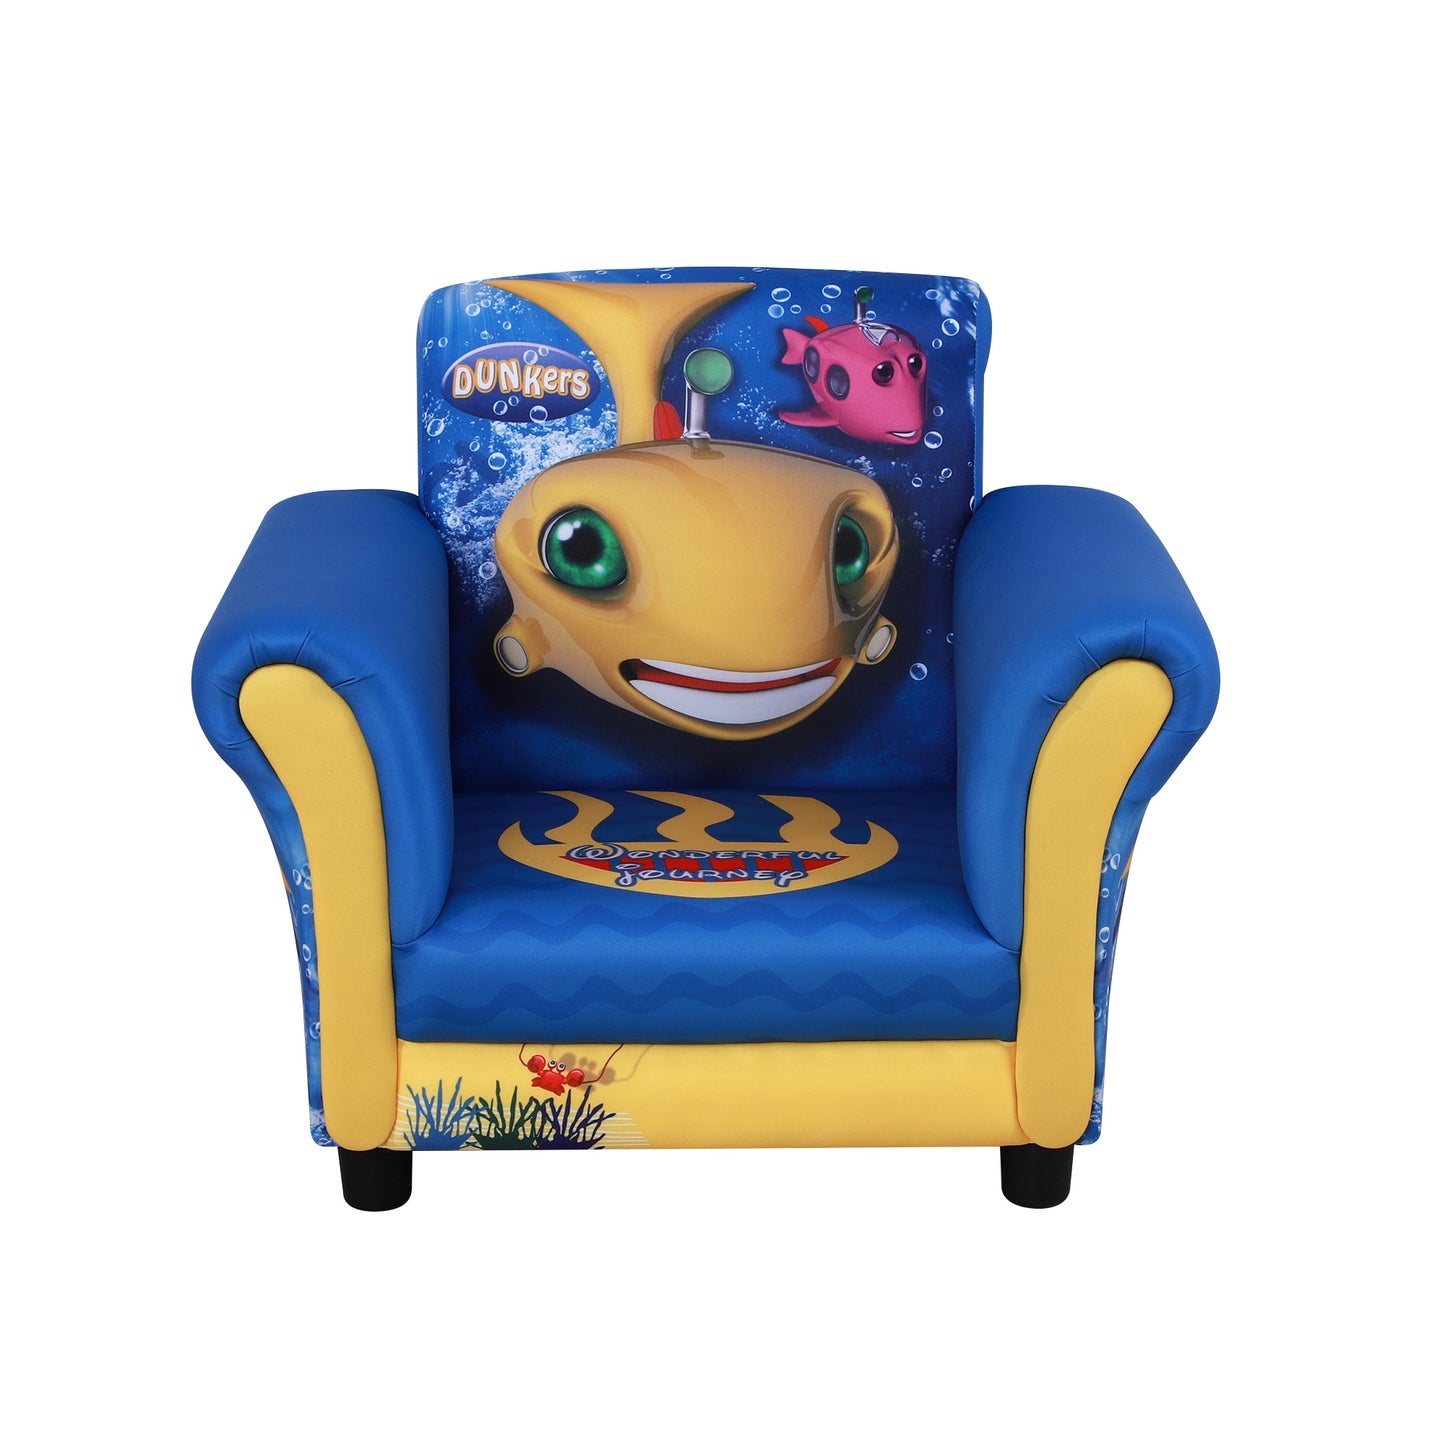 HOMCOM Kids Polyester Upholstered Under-the-Sea Armchair Blue/Yellow